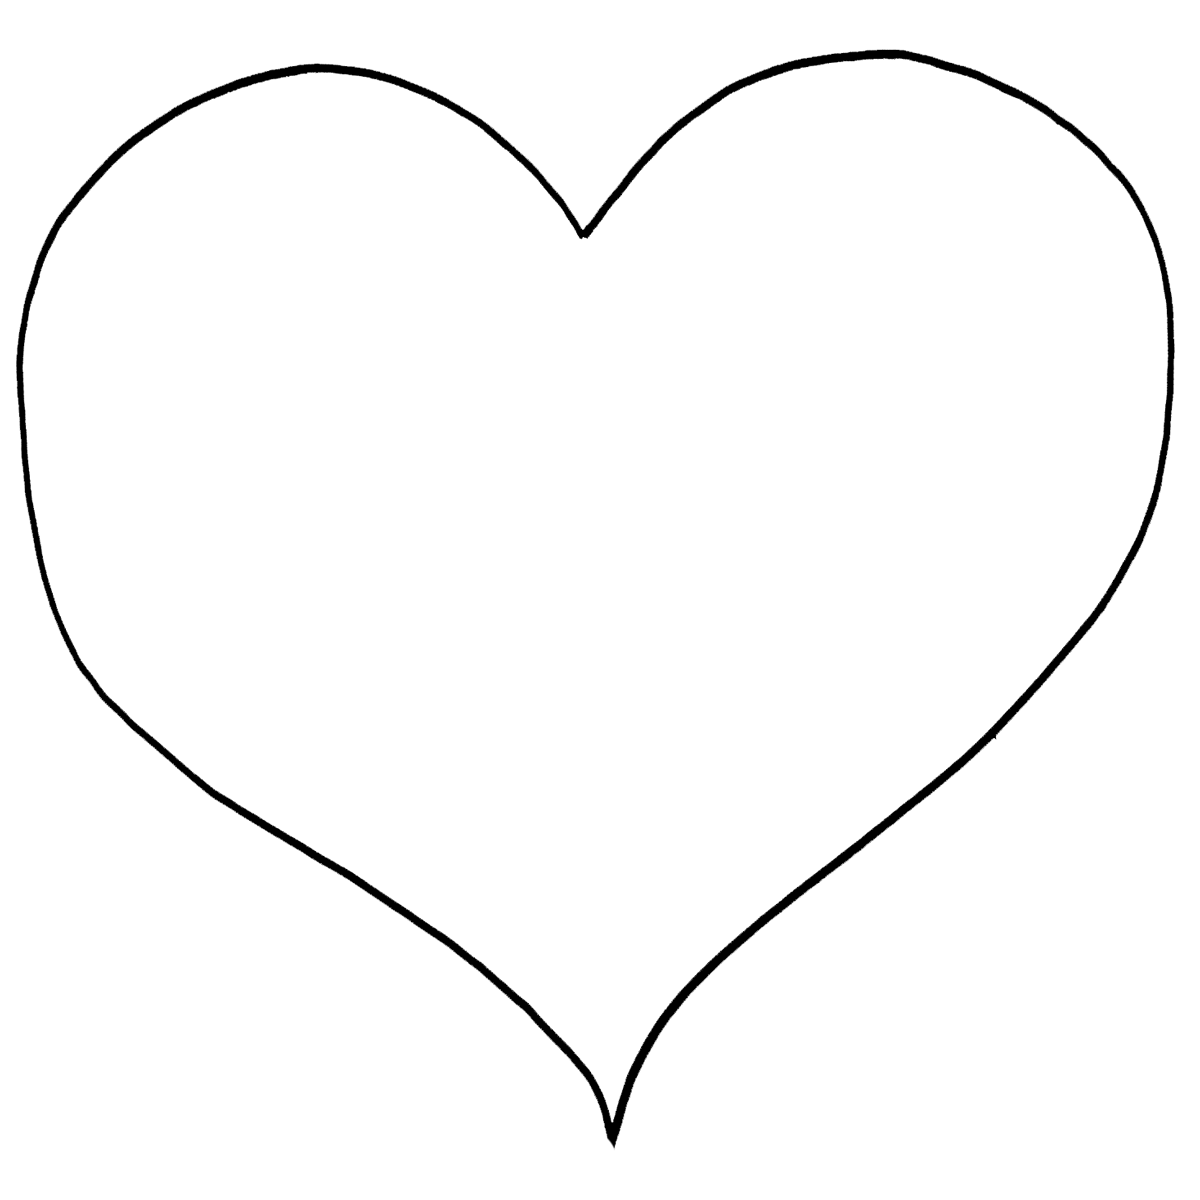 printable heart coloring pages heart coloring page download free heart coloring page coloring pages printable heart 